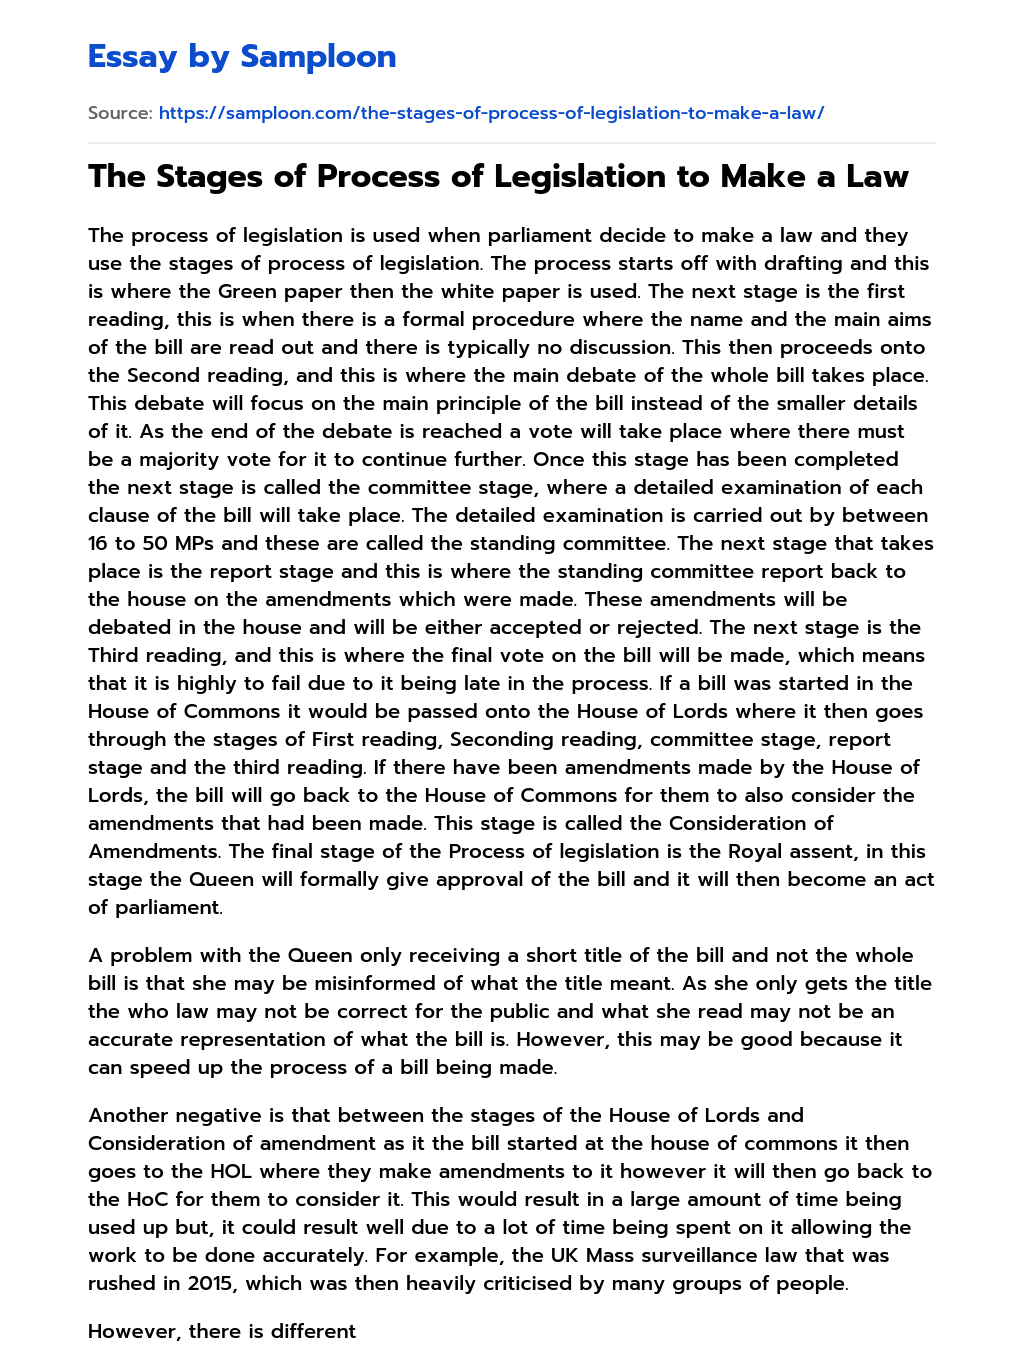 The Stages of Process of Legislation to Make a Law essay